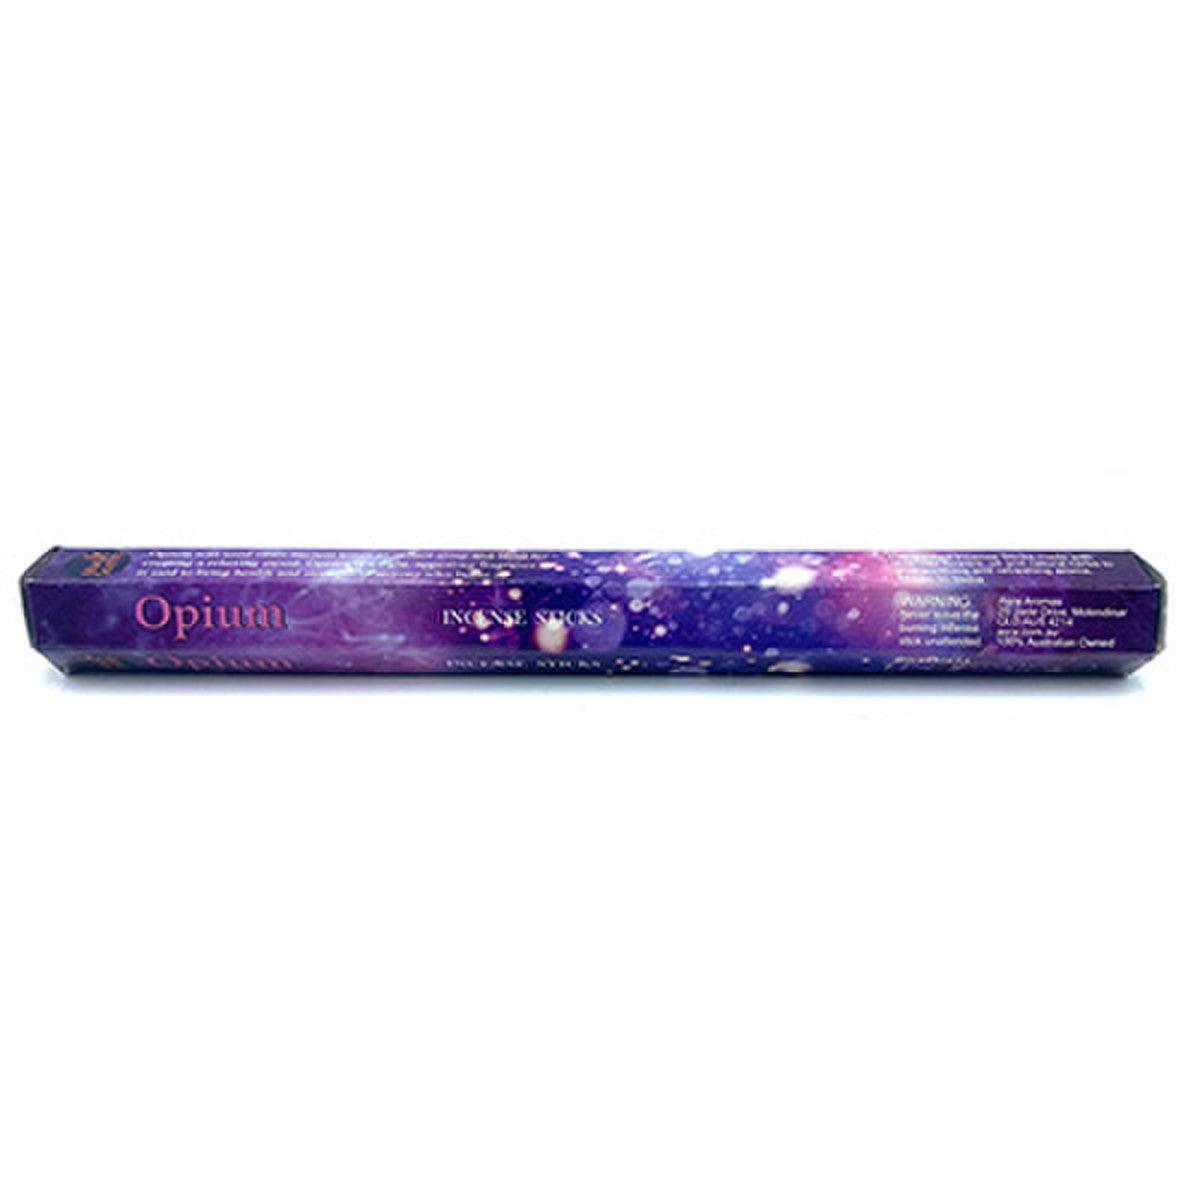 Magic Scents Hex Opium Incense Sticks Pack of 20 - Inspire Me Naturally 